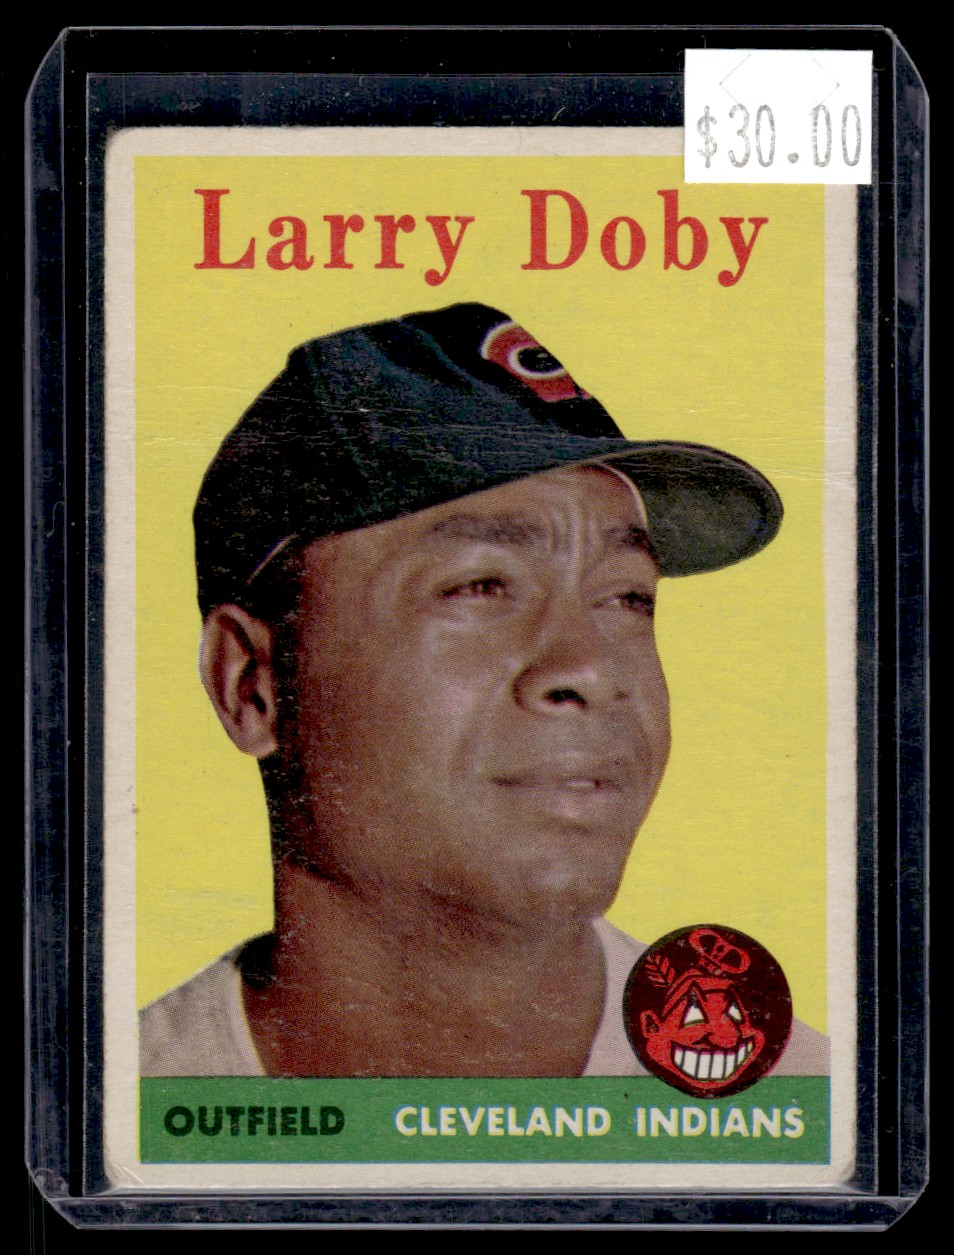 1958 Topps Larry Doby #424 card front image